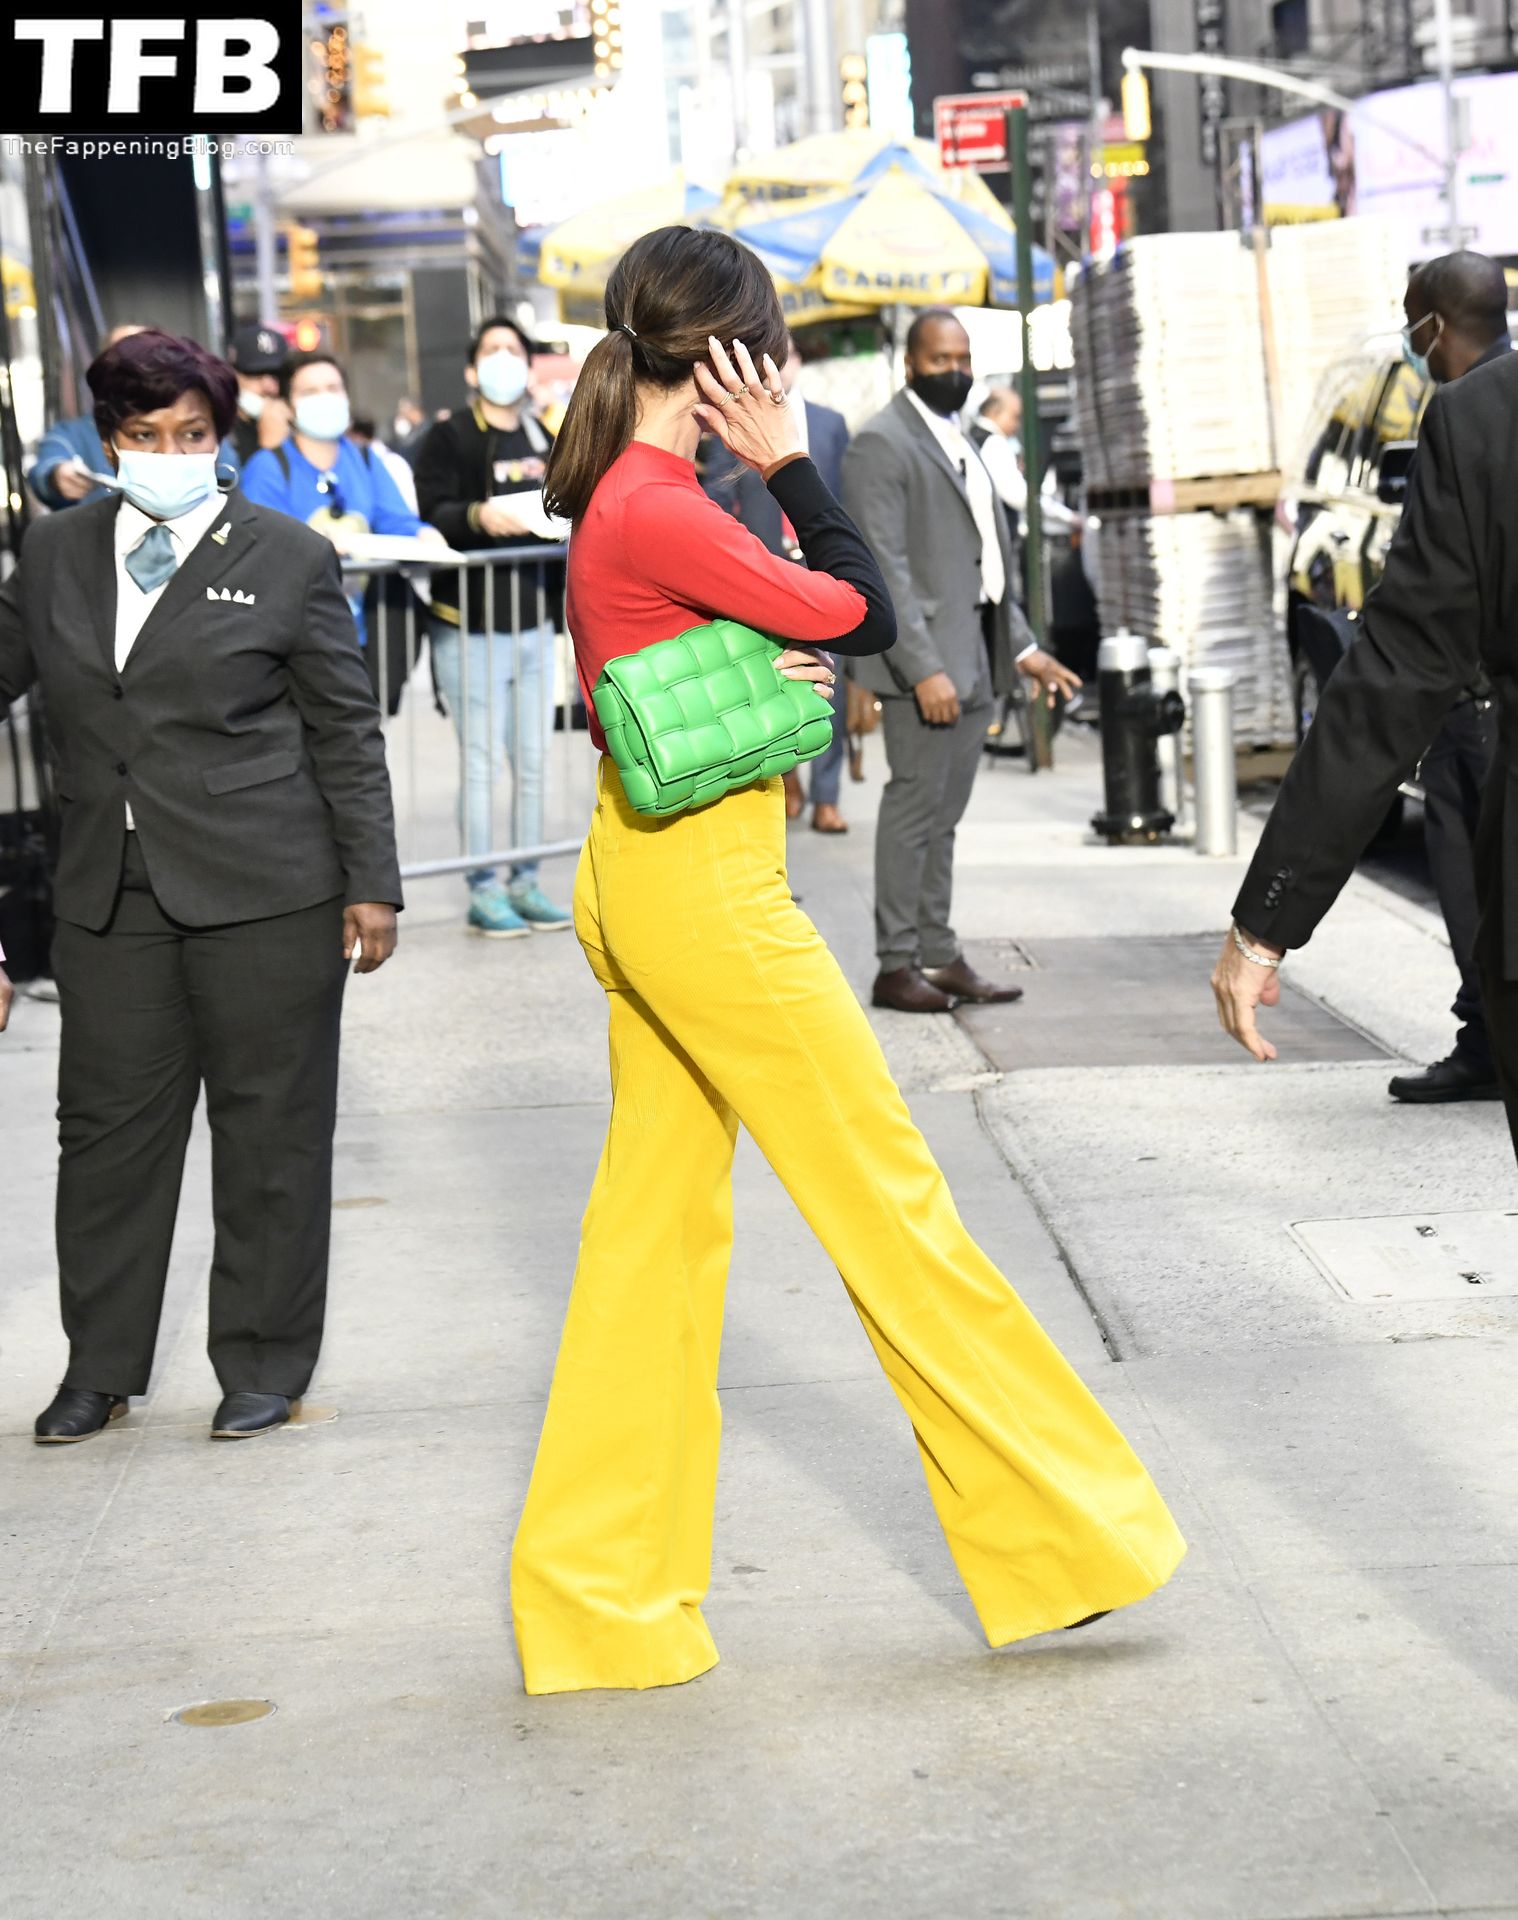 Victoria Beckham Look
s Stylish in NYC (75 Photos)